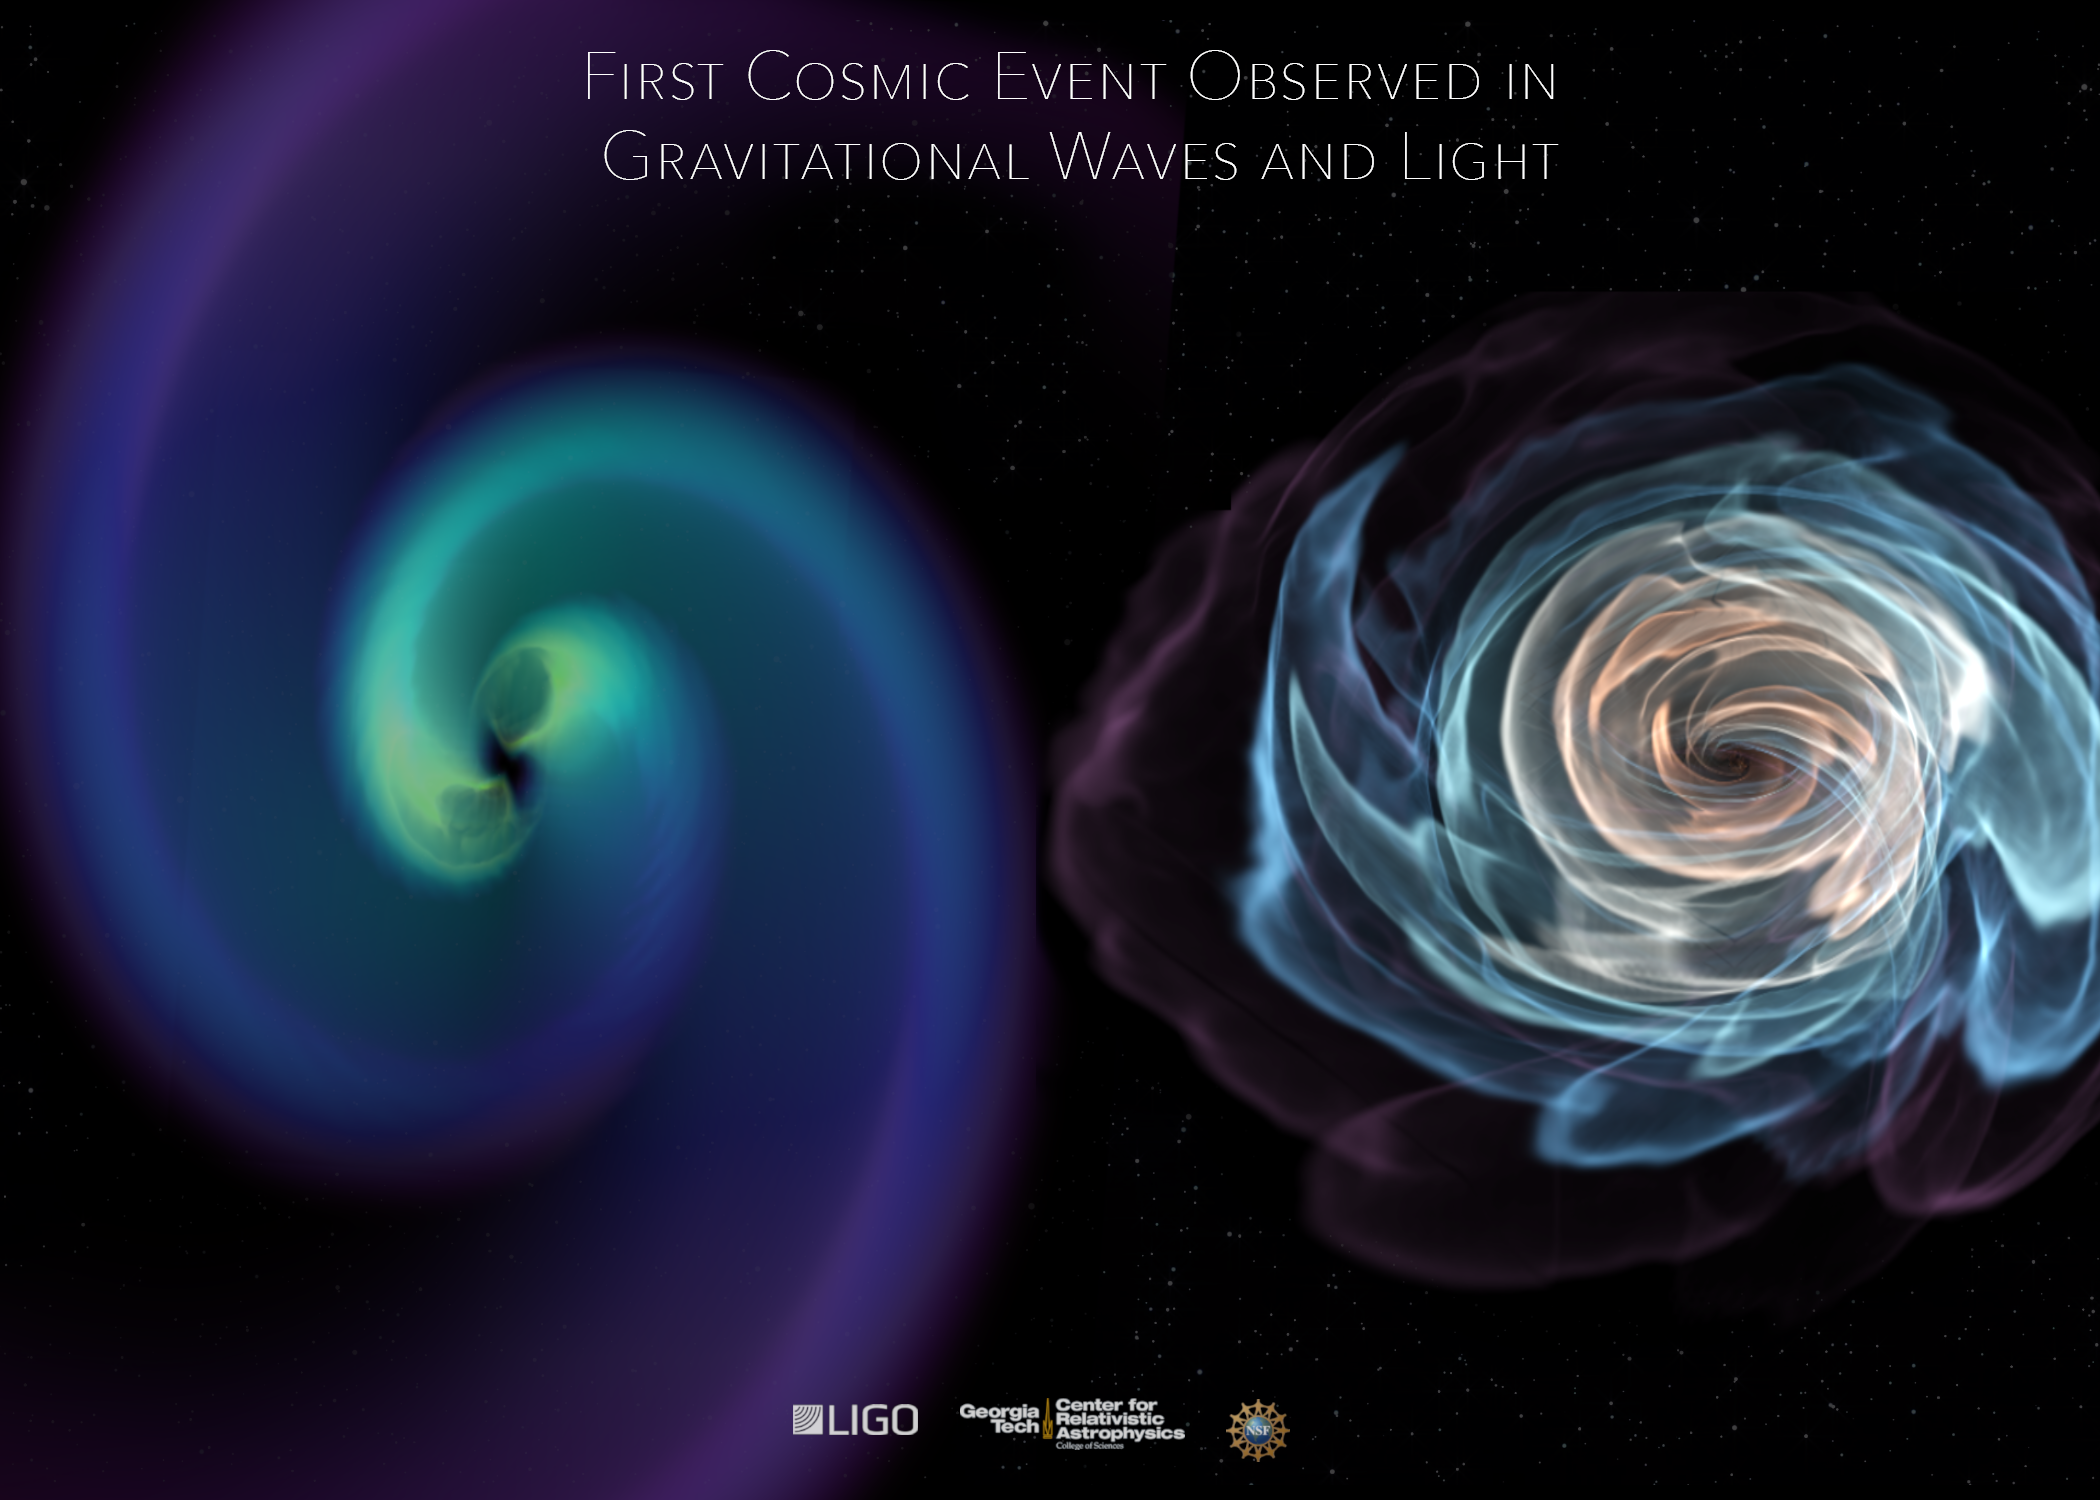 This visualization shows the coalescence of two orbiting neutron stars. The right panel contains a visualization of the matter of the neutron stars. The left panel shows how space-time is distorted near the collisions. Image credit: Karan Jani/Georgia Tech